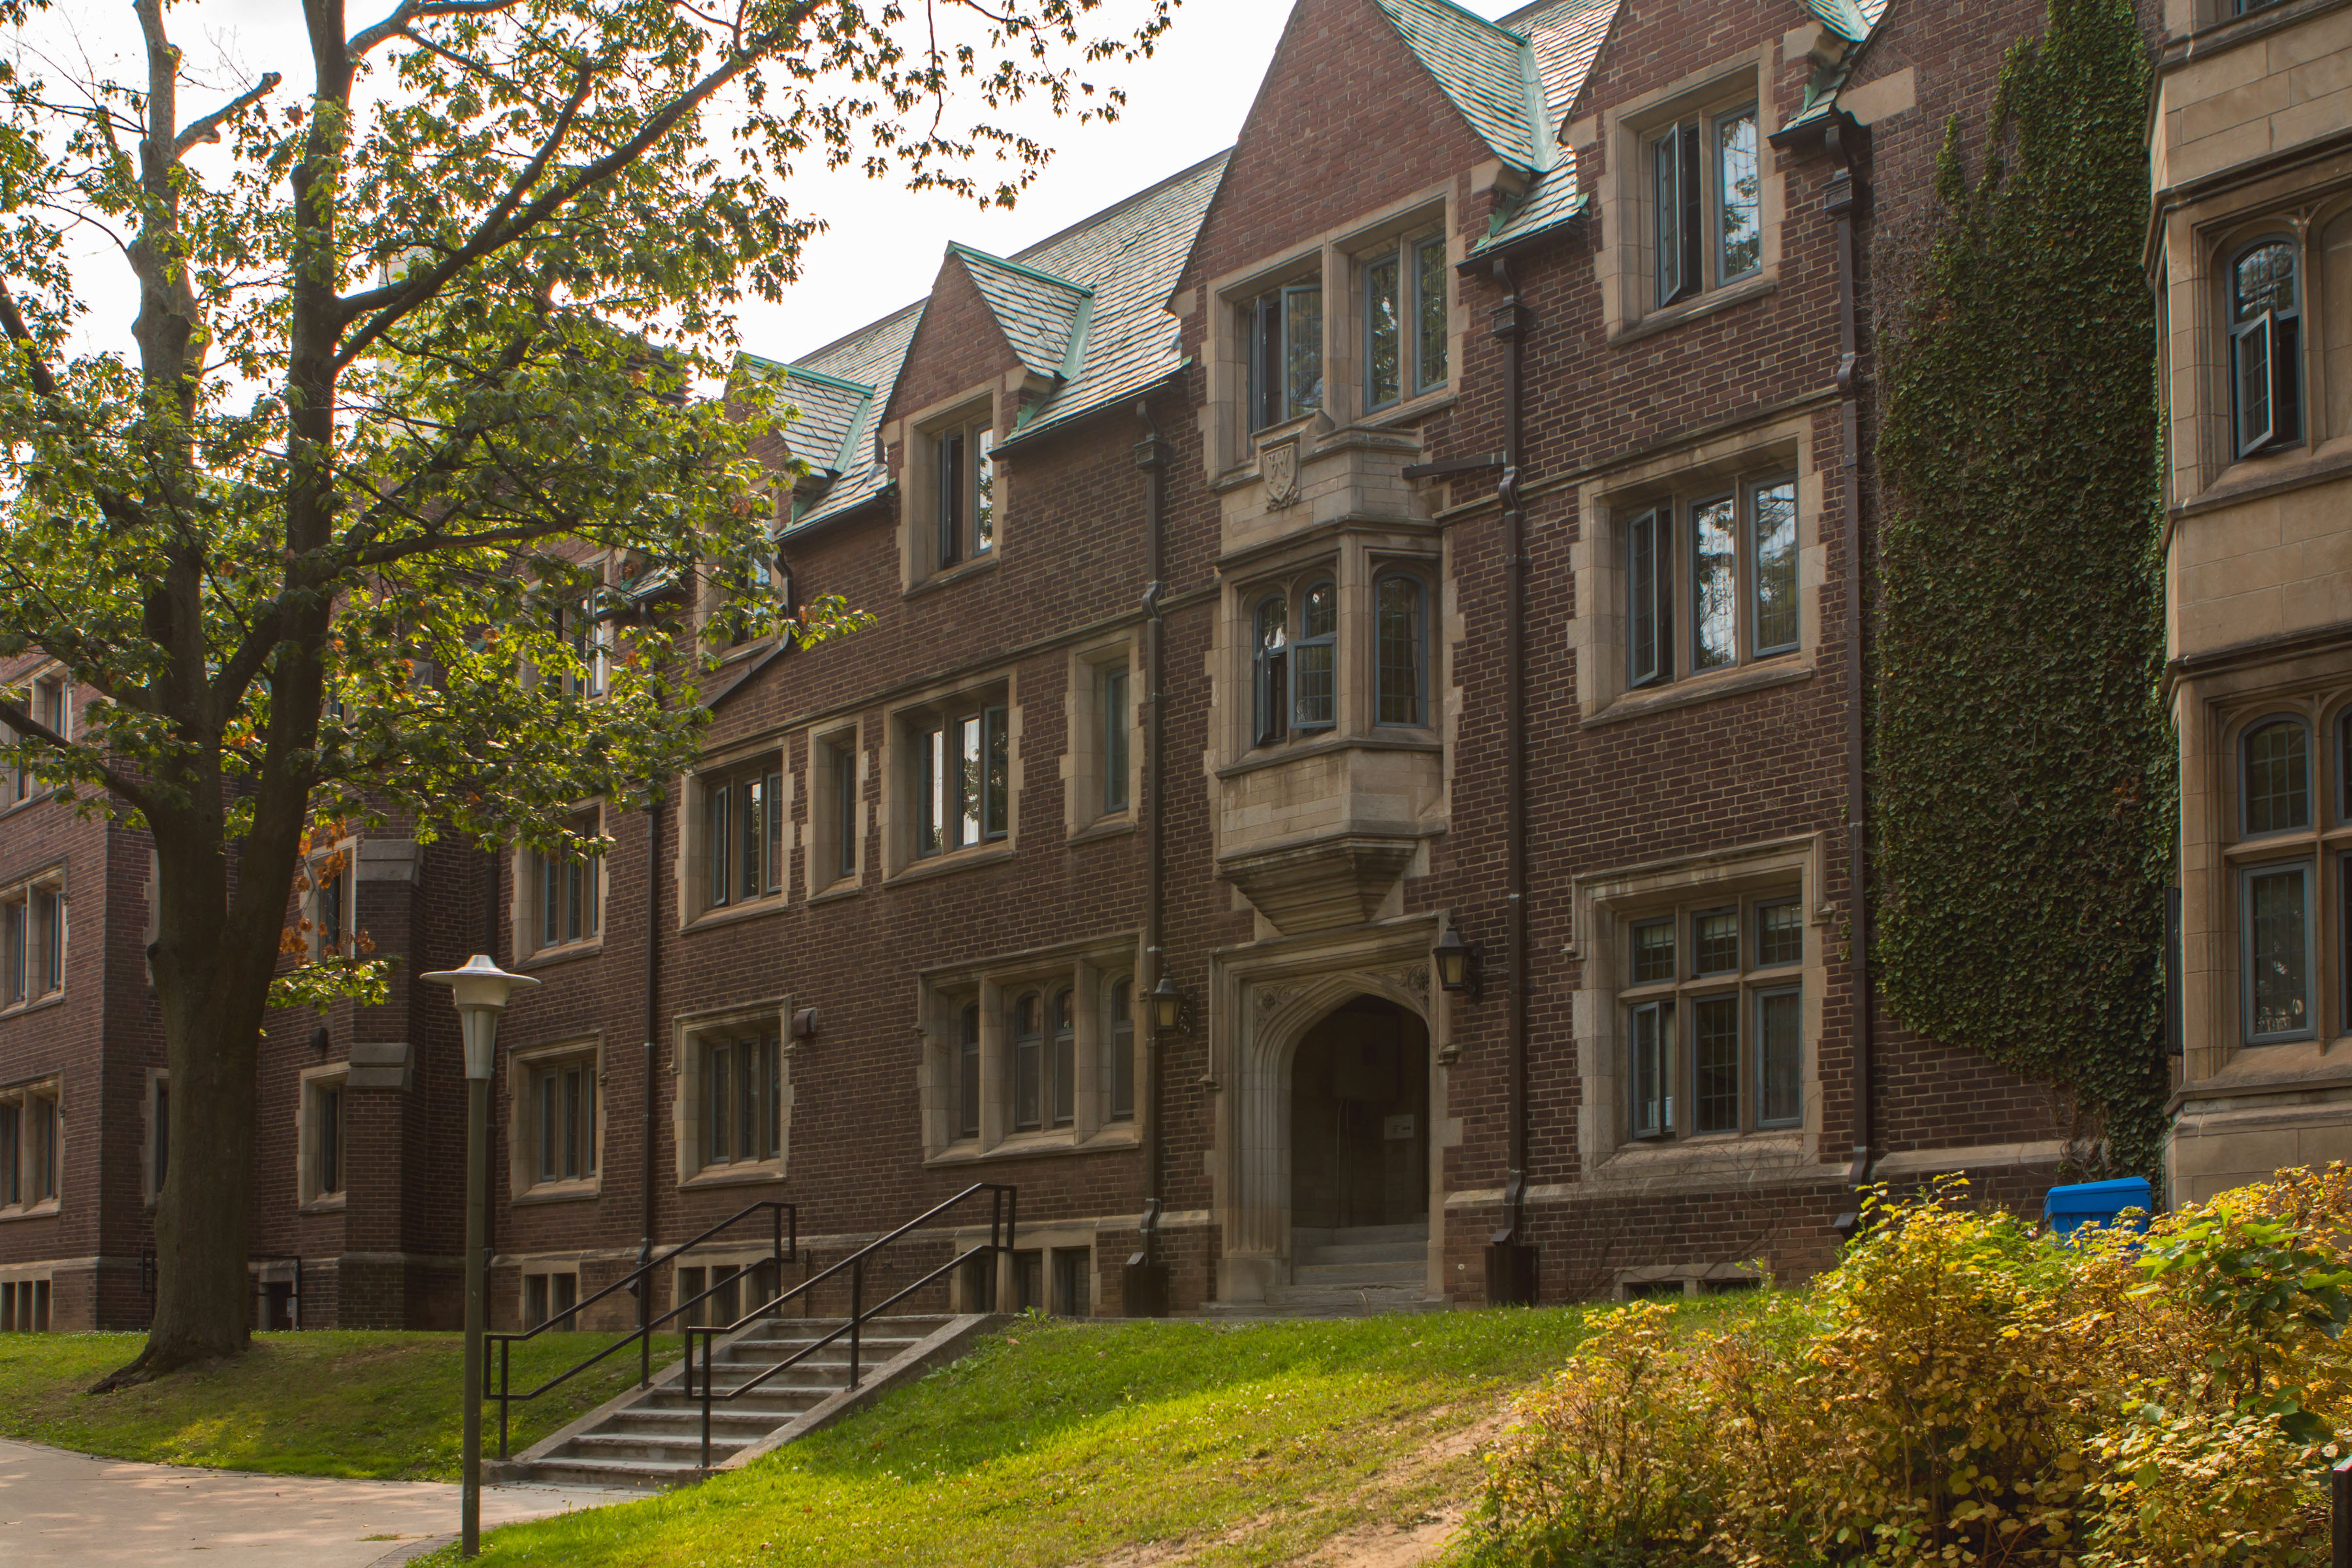 Wallingford Hall is located in the wast quad at McMaster University